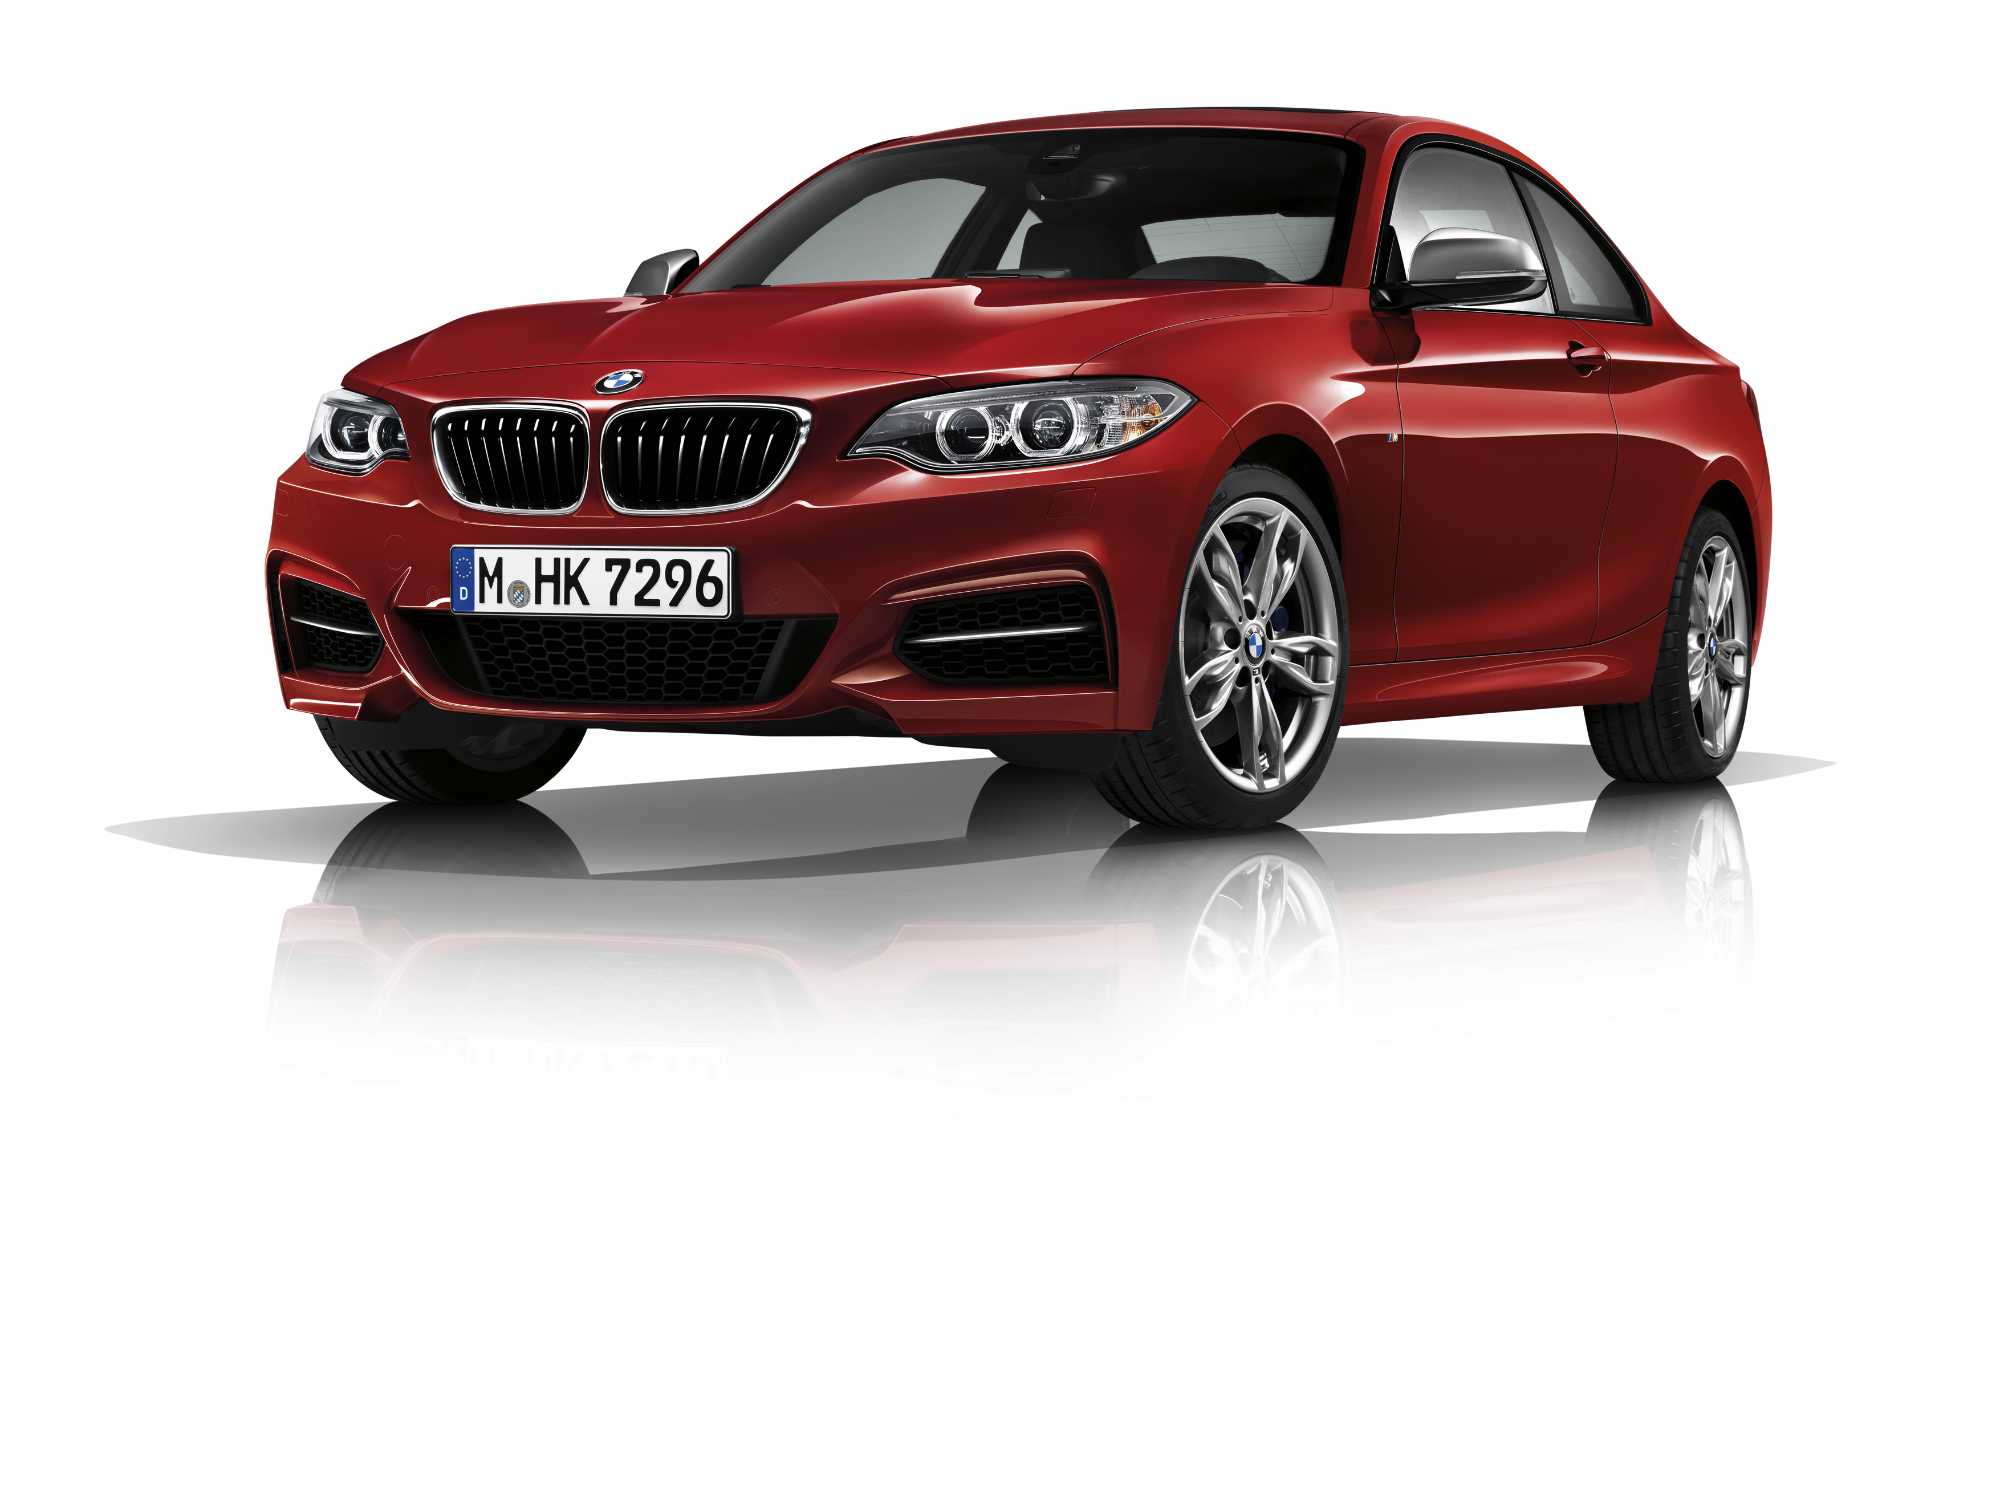 The new 2017 BMW 2 Series now featuring the latest generation of BMW  TwinPower Turbo engines.